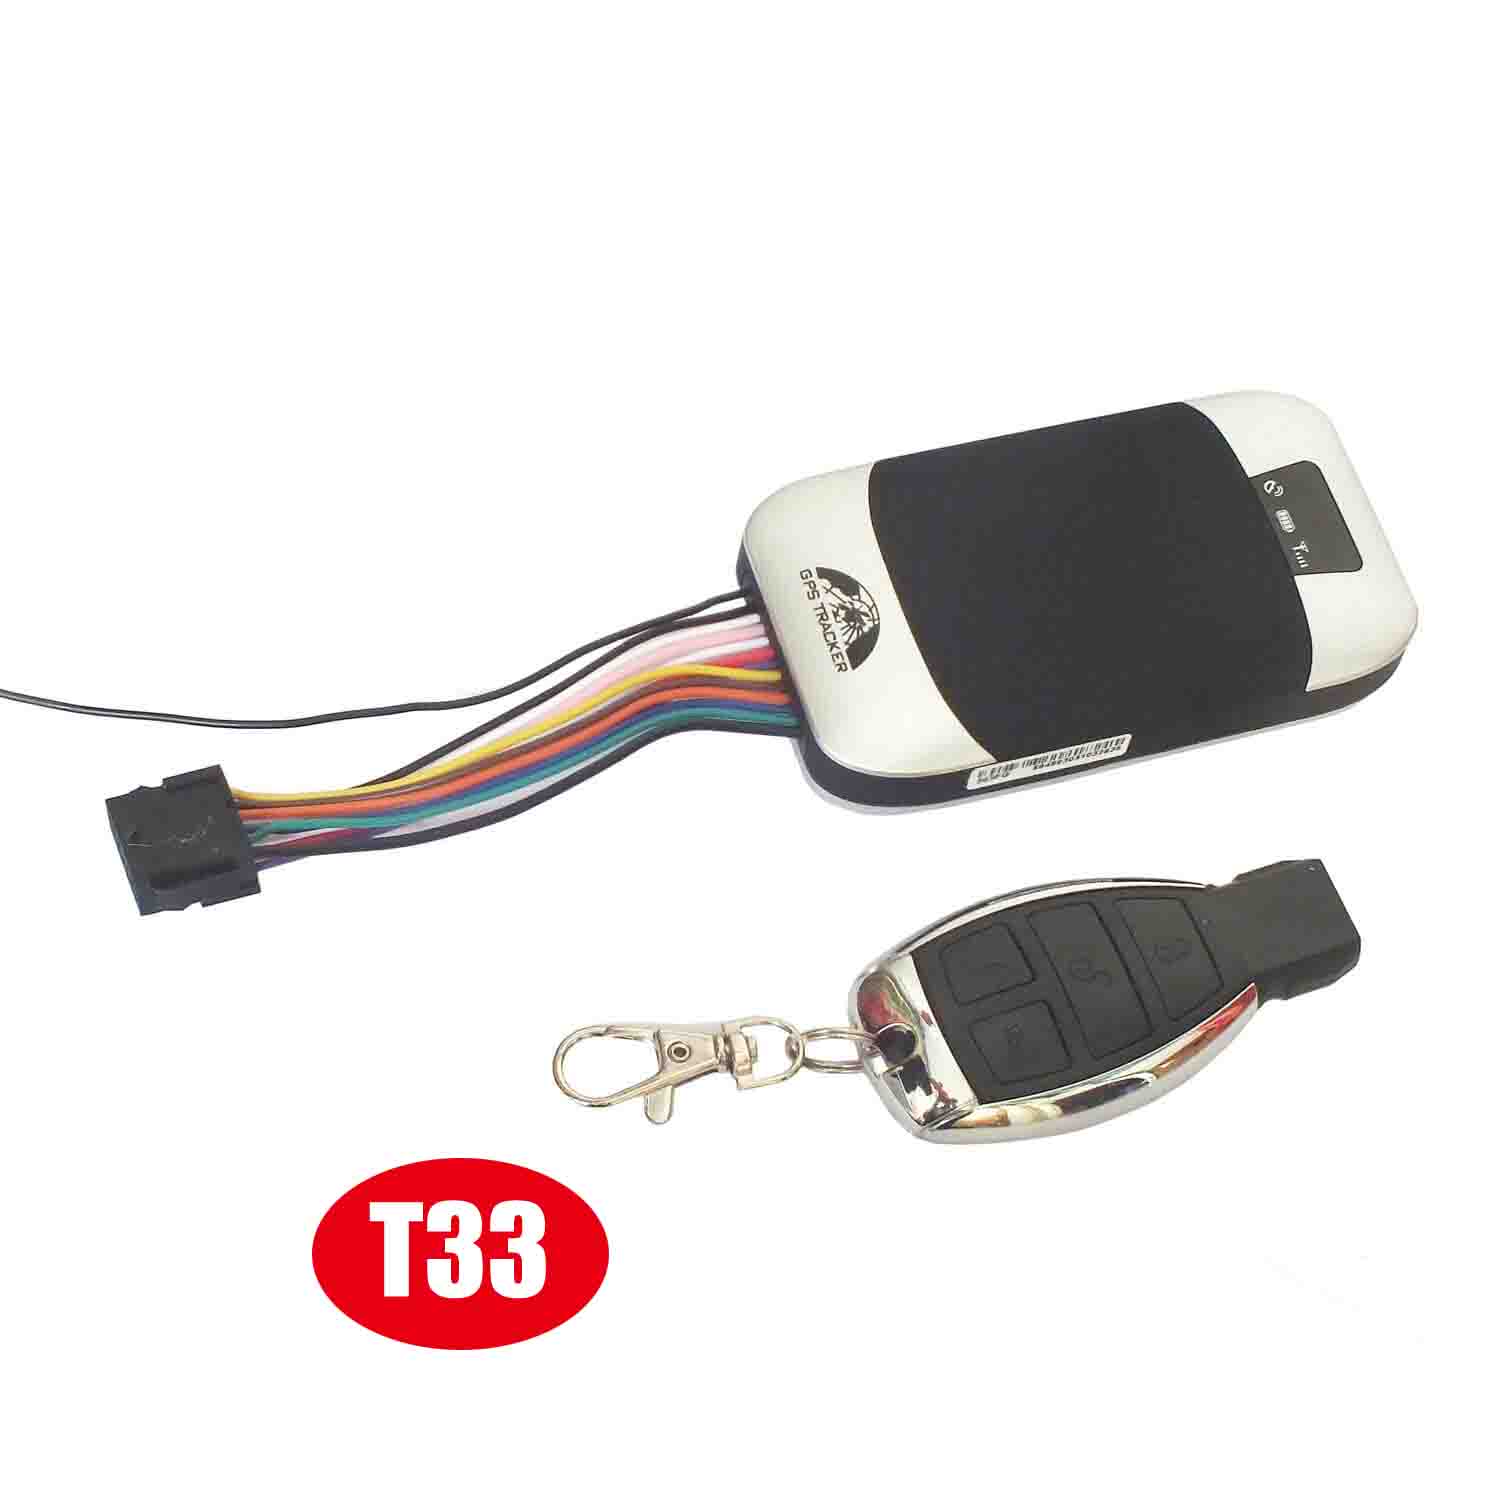 WCDMA Waterproof Vehicle GPS tracking device with Remote Cut off engine 